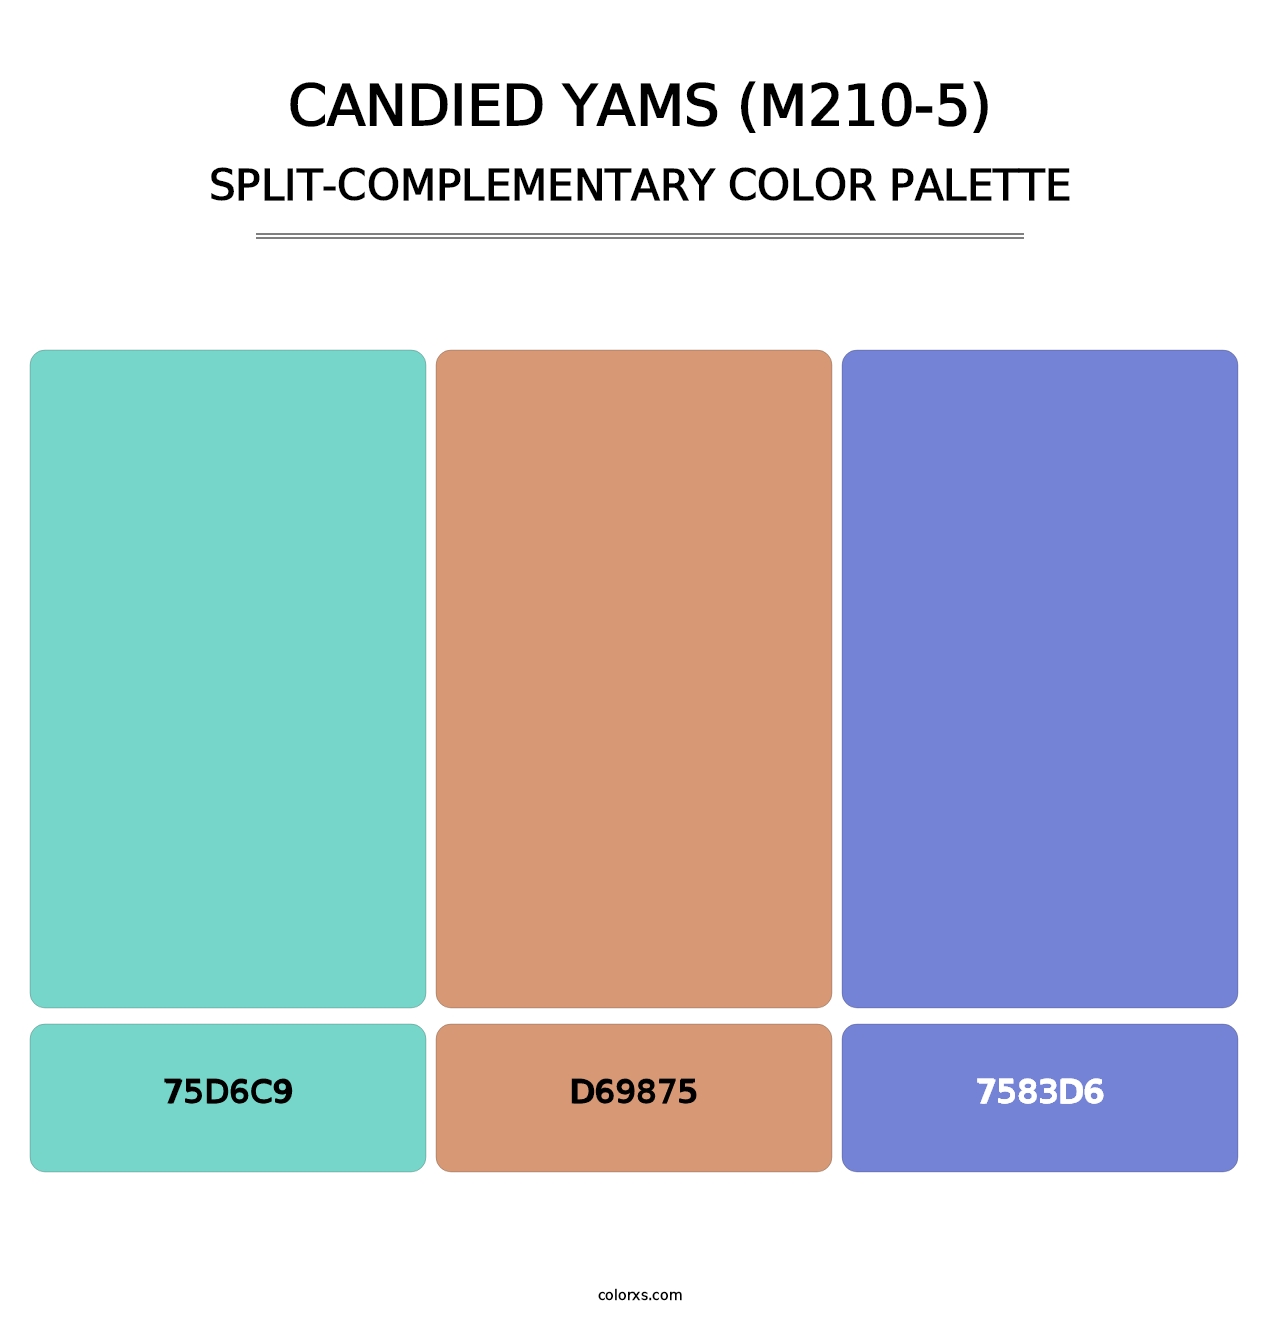 Candied Yams (M210-5) - Split-Complementary Color Palette